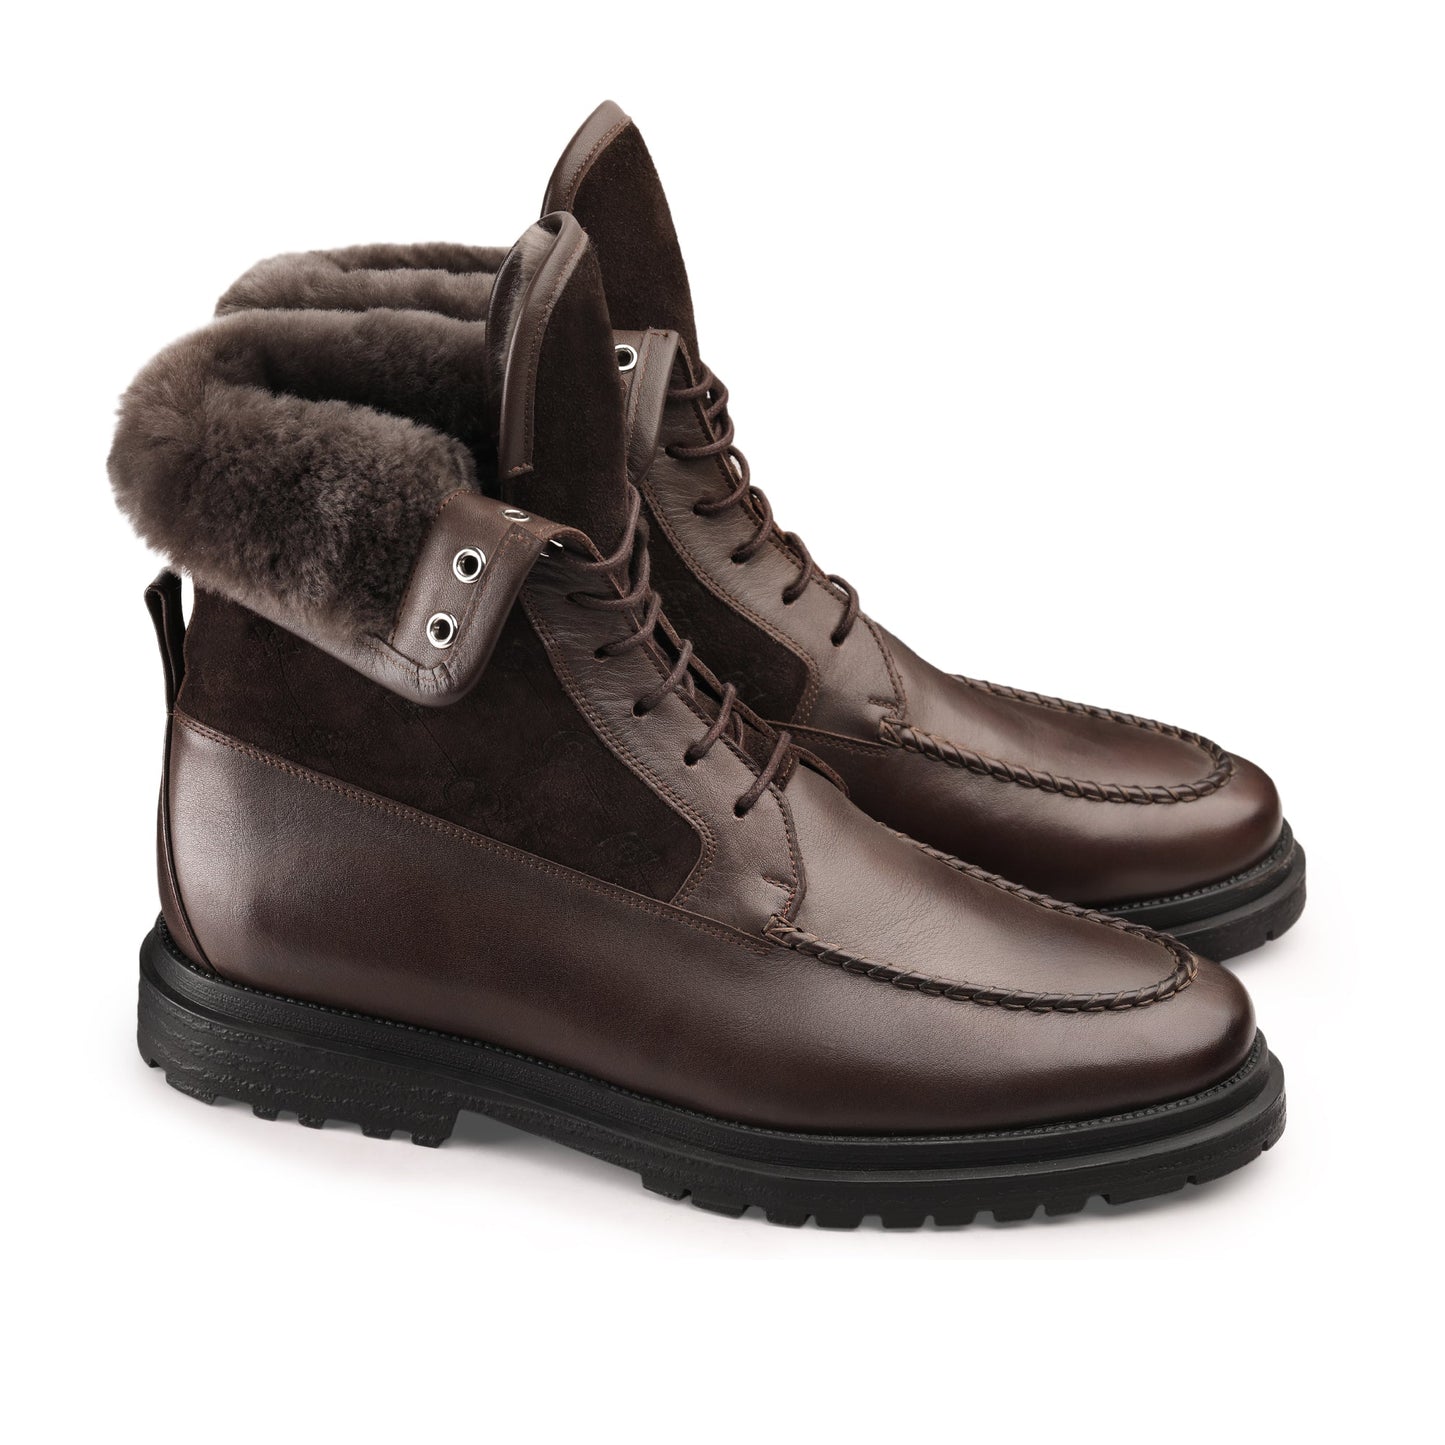 Brown winter boots